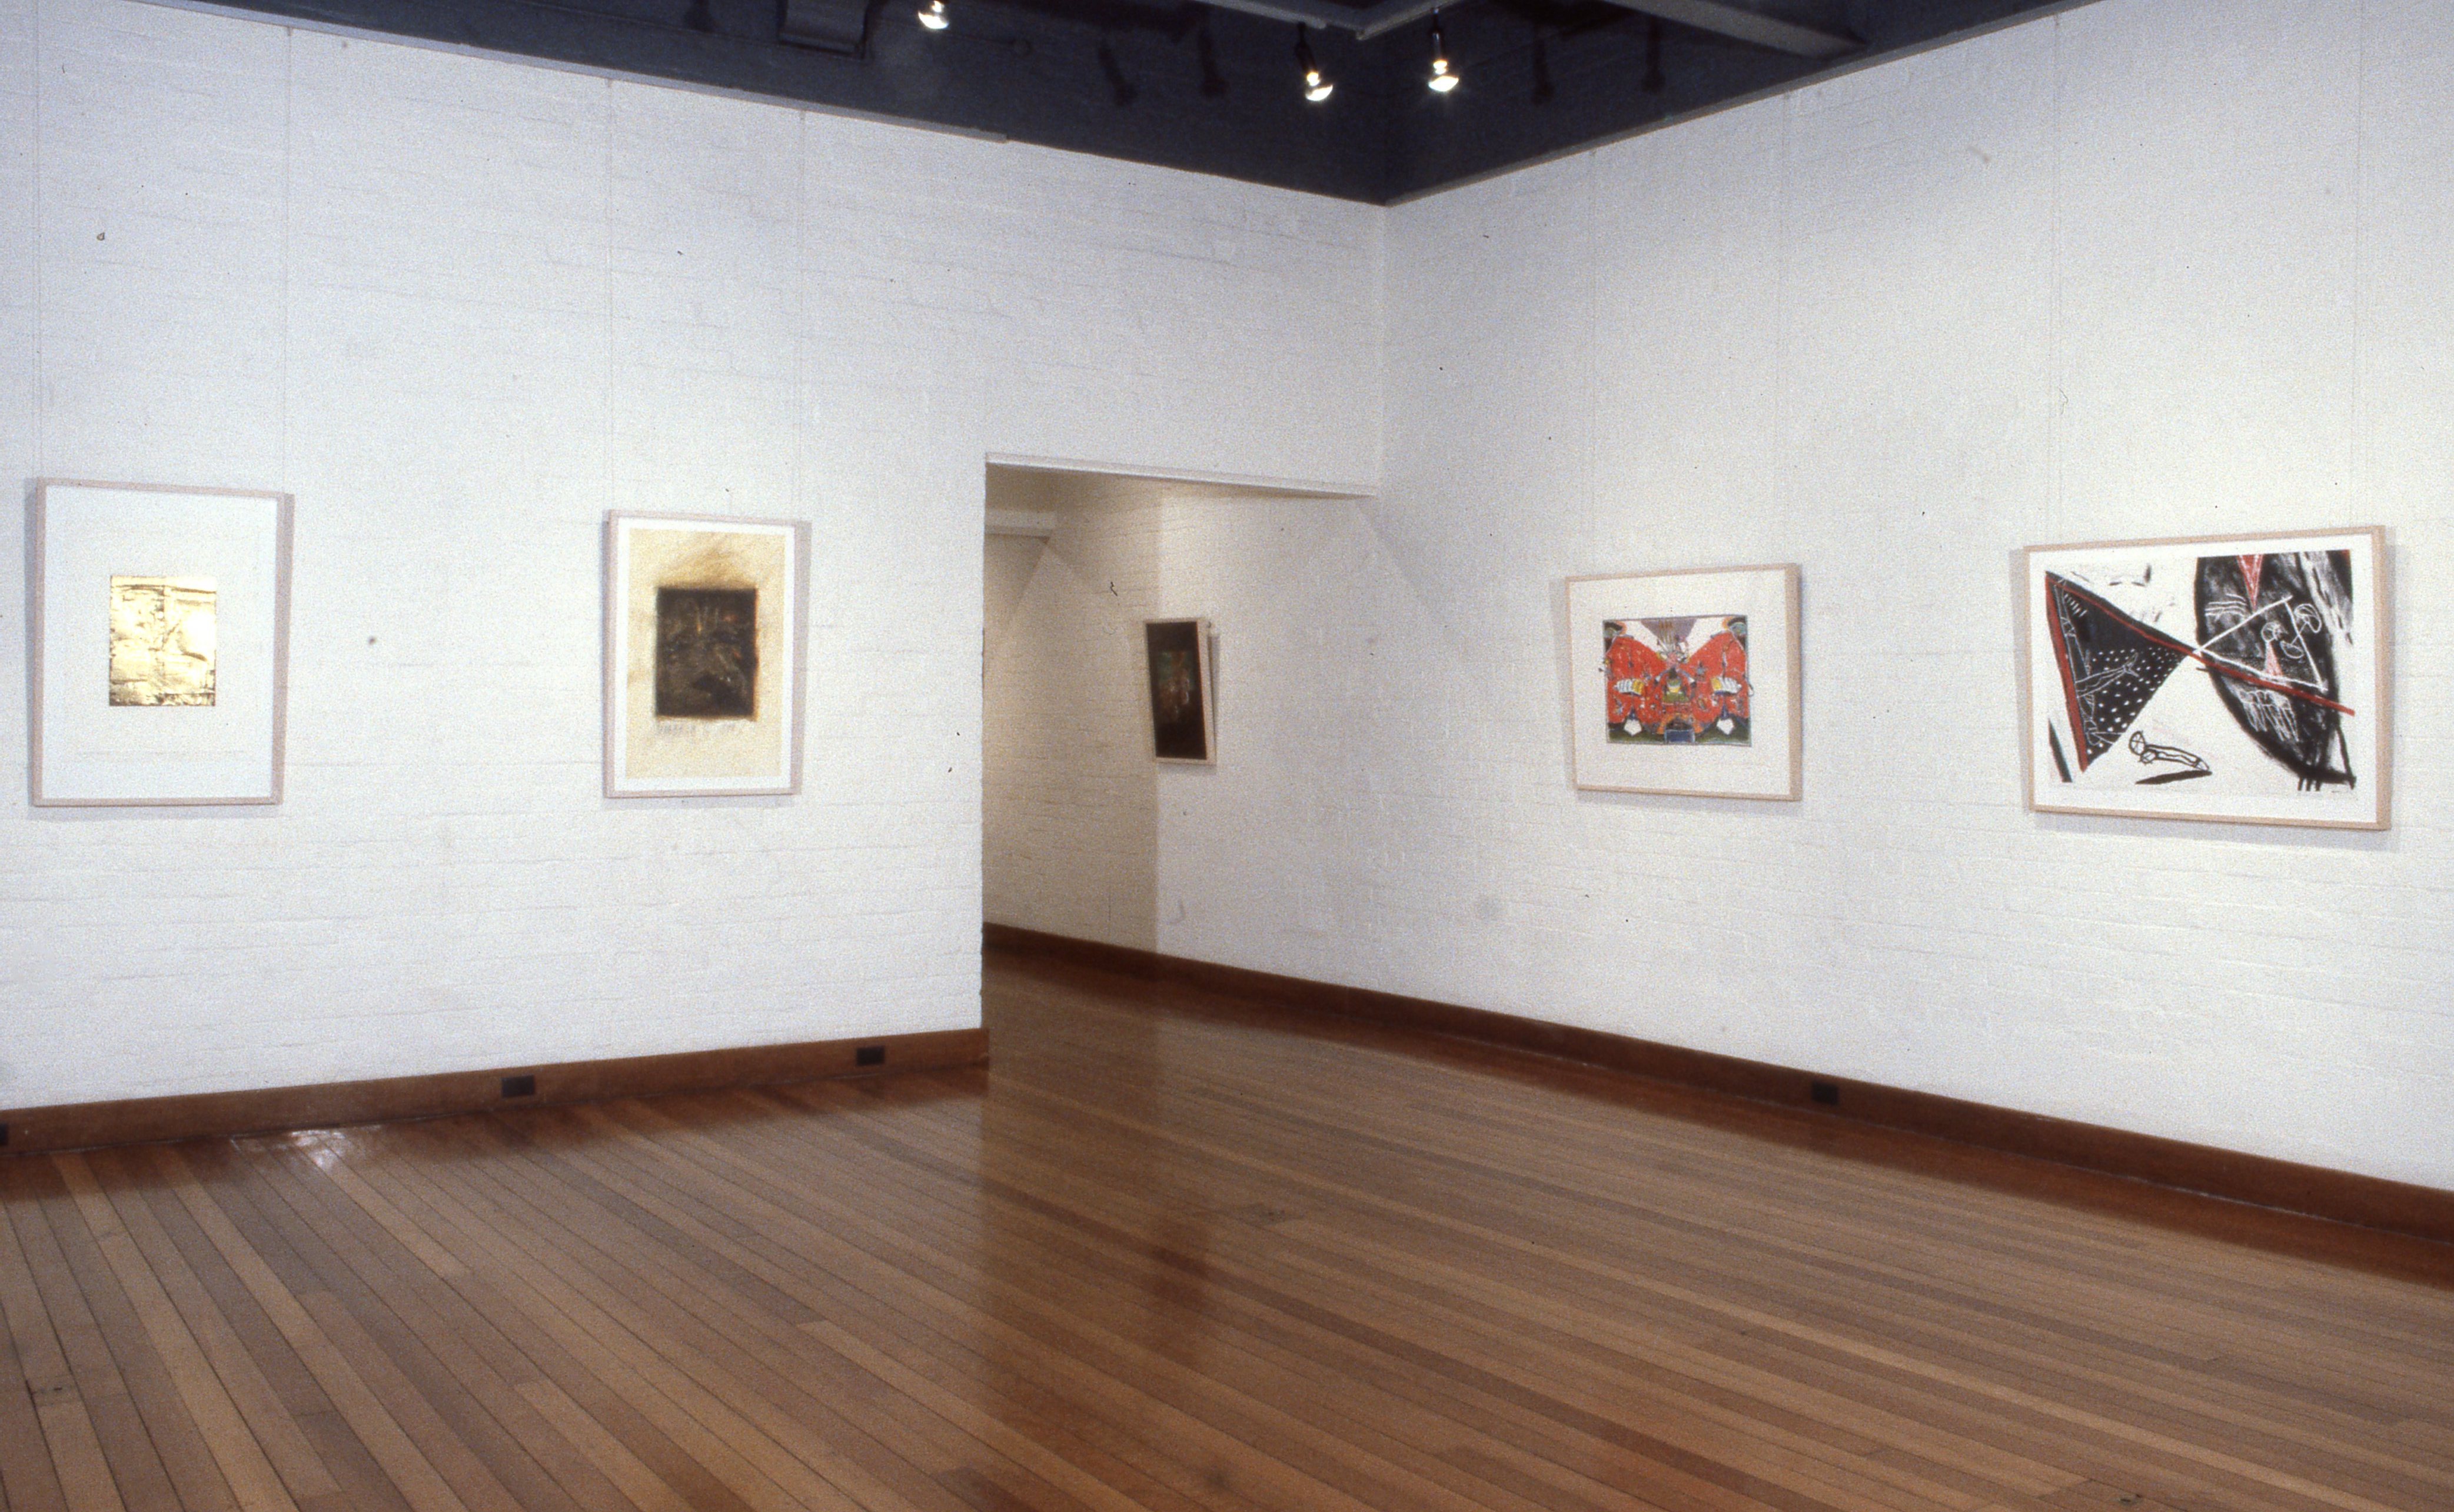 idg_archive_1992_hungarian_art_today_install.jpg